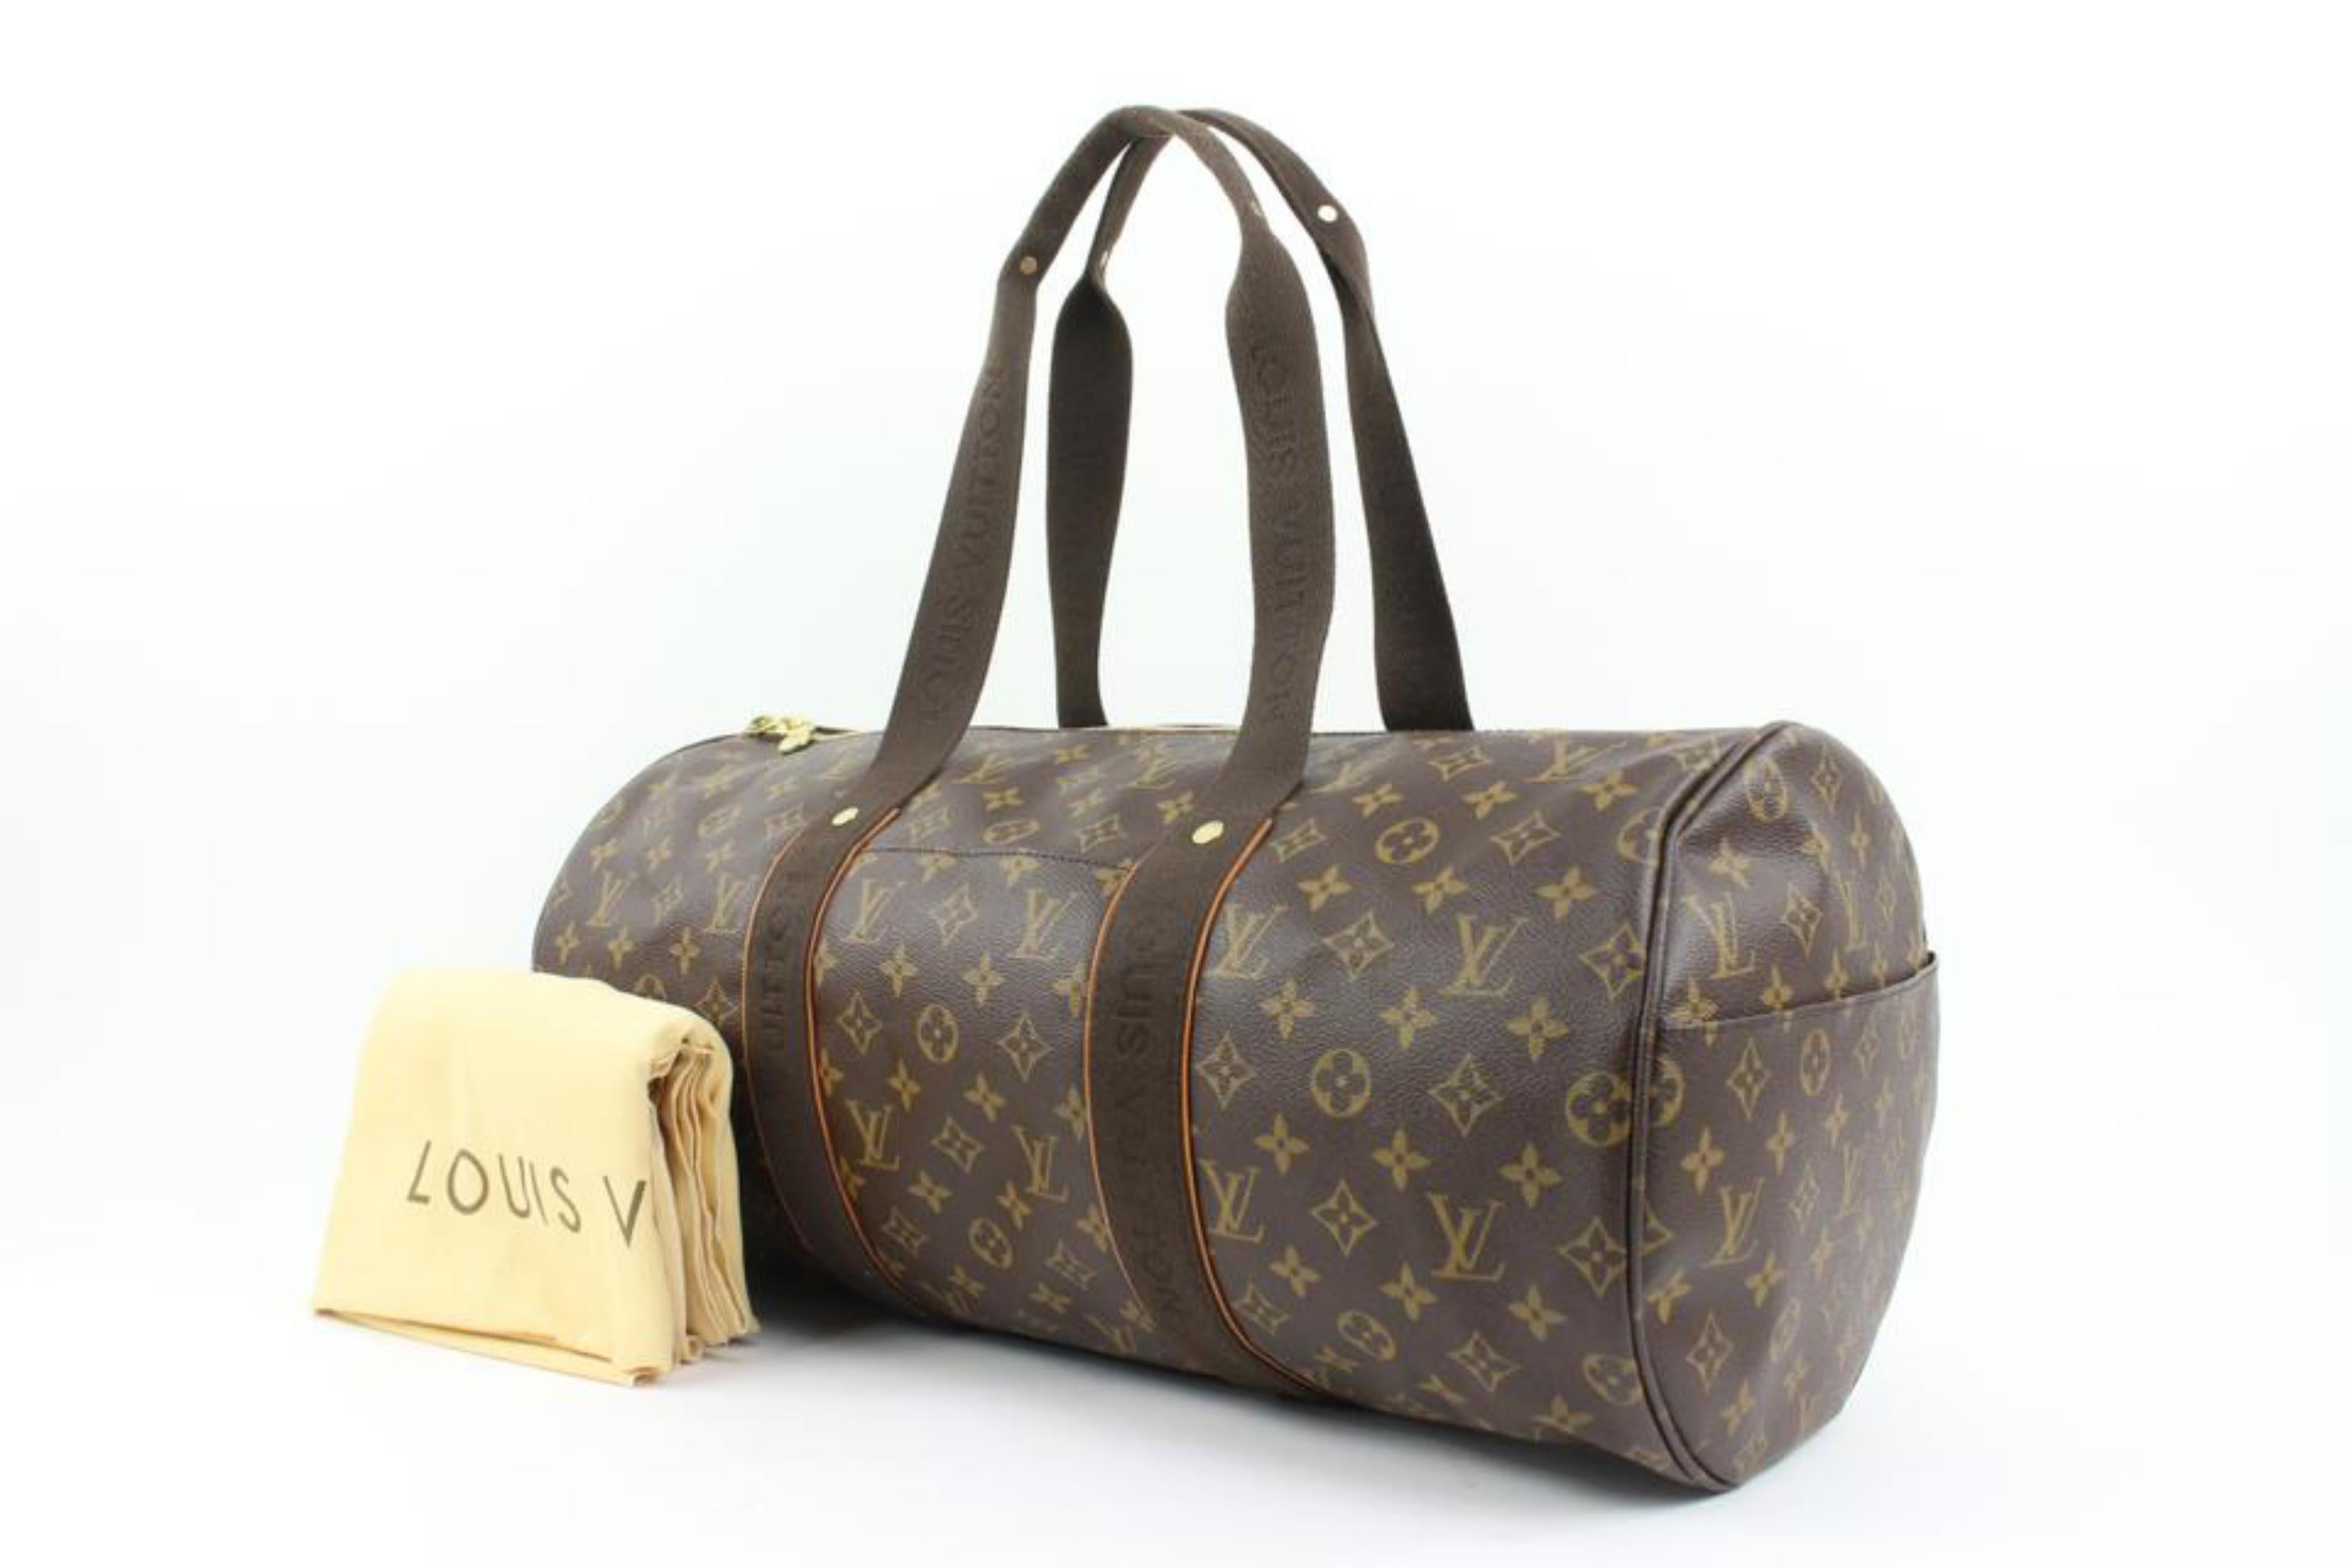 Louis Vuitton Monogram Sporty Beaubourg Duffle Boston Duffle s29lv40
Date Code/Serial Number: AR3059
Made In: France
Measurements: Length:  19.5